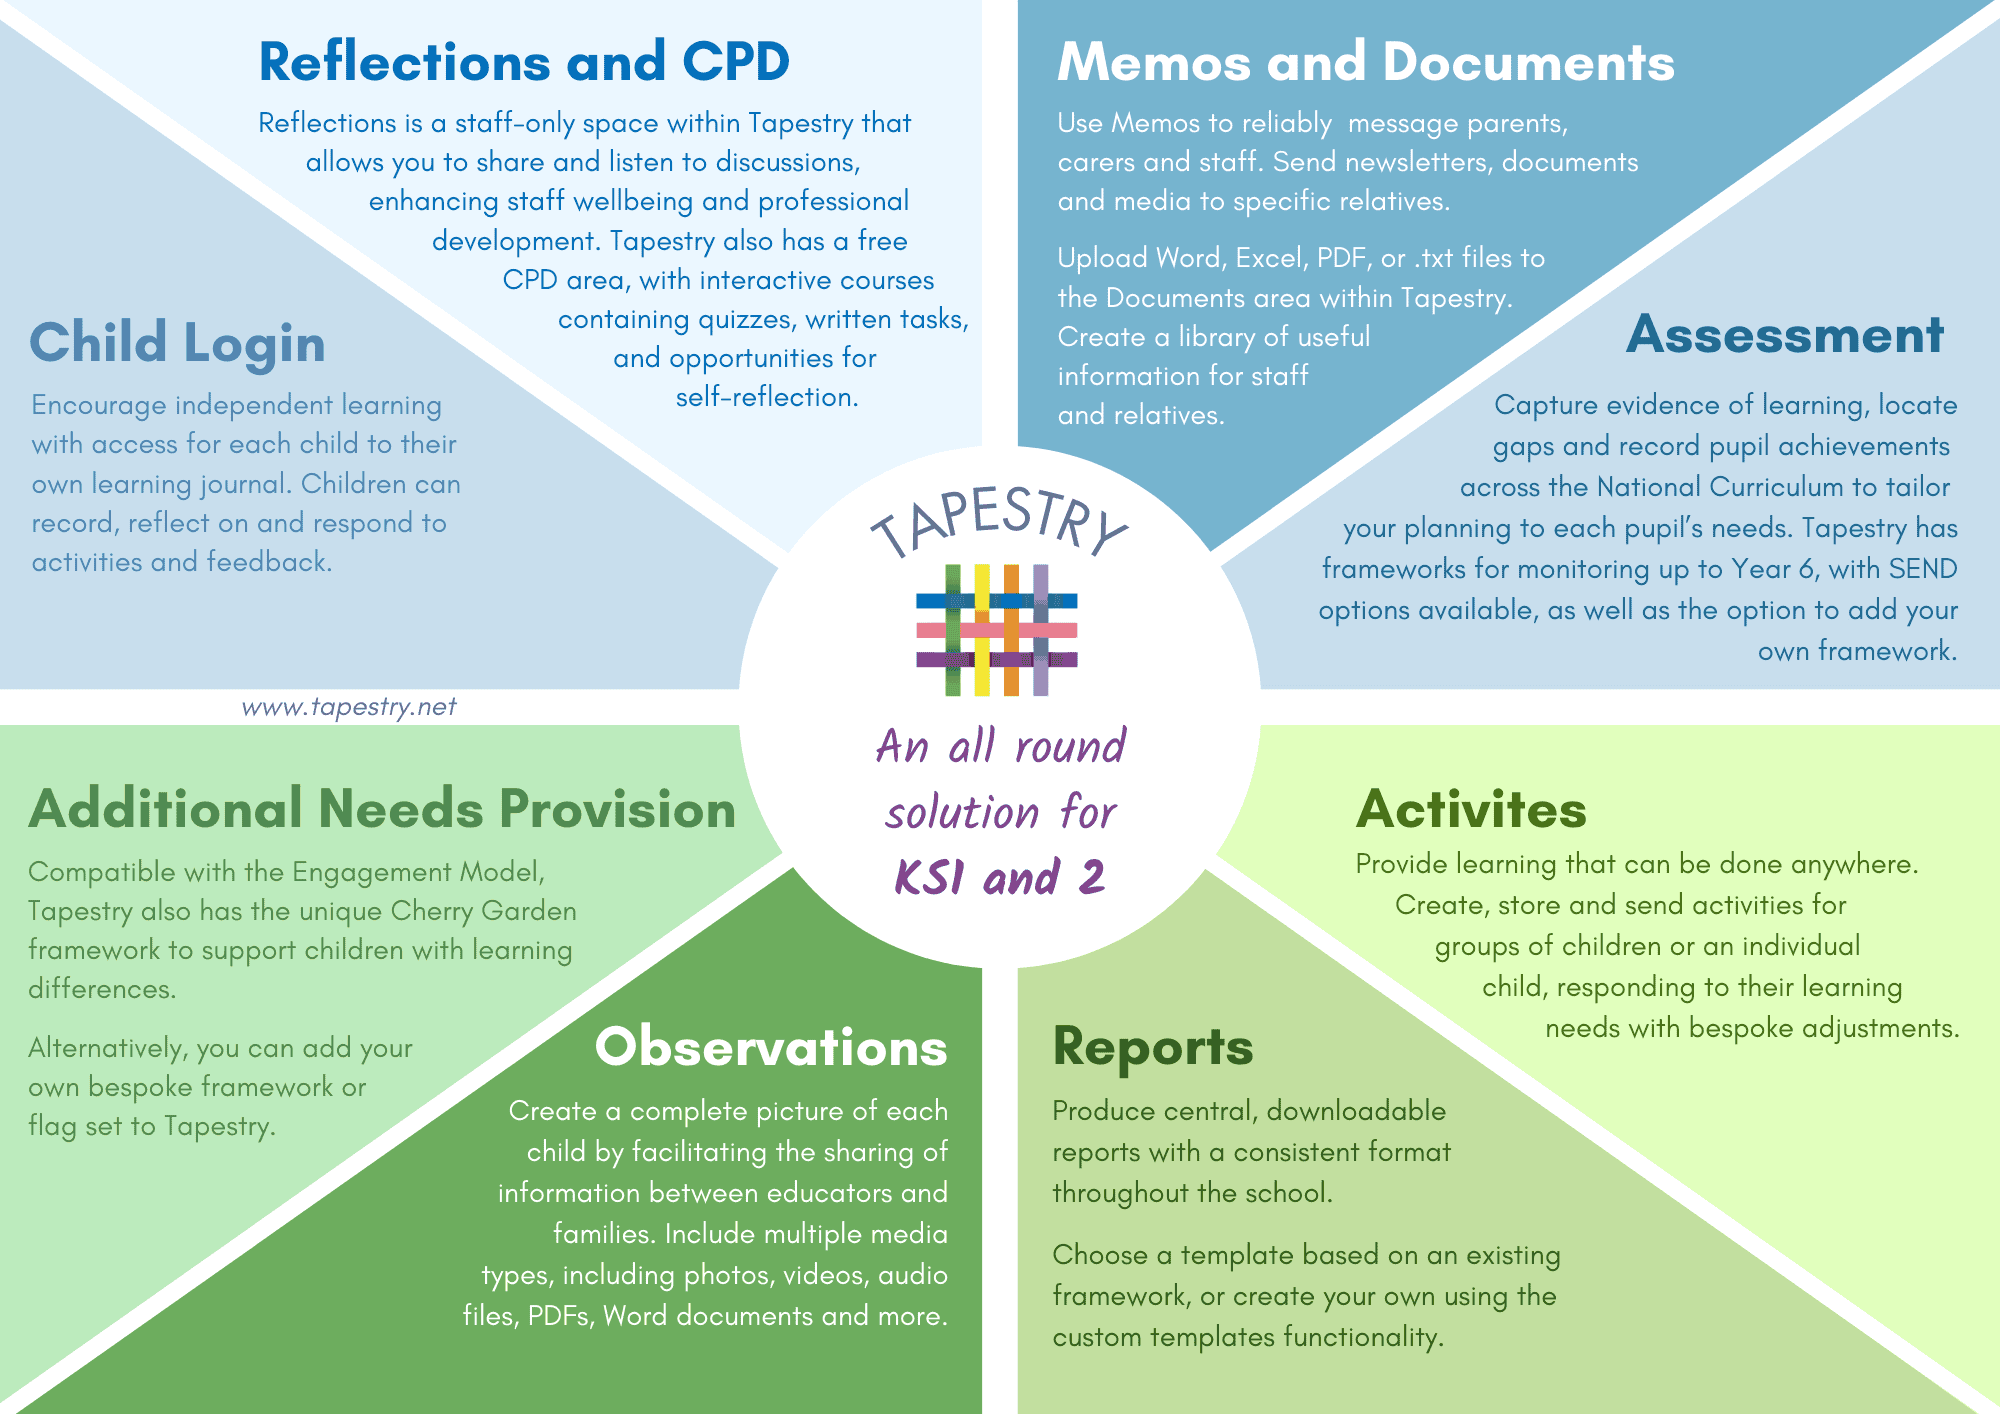 Infographic showing the key Tapestry features: Reflections, Memos and Documents, Assessments, Activities, Reports, Observations, Additional Needs Provision, and Child Login.